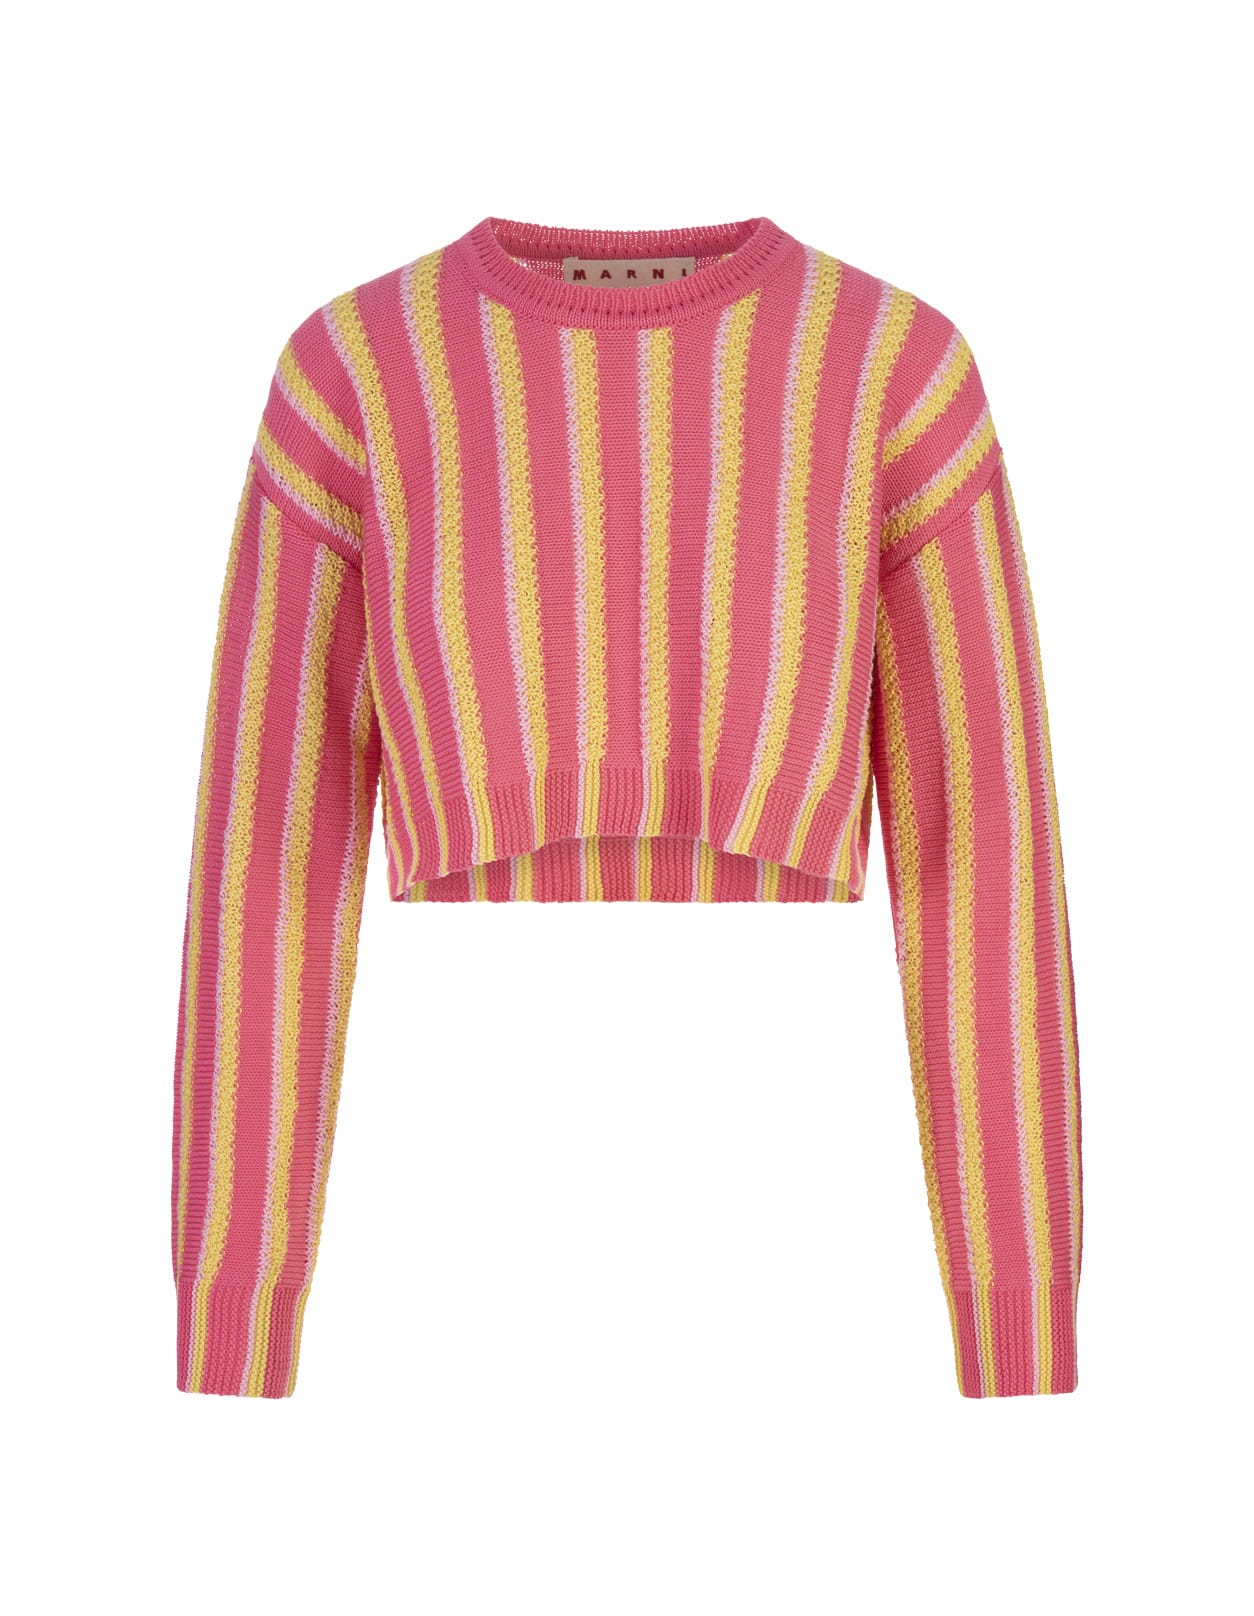 Shop Marni Pink, Yellow And White Striped Knitted Crop Pullover